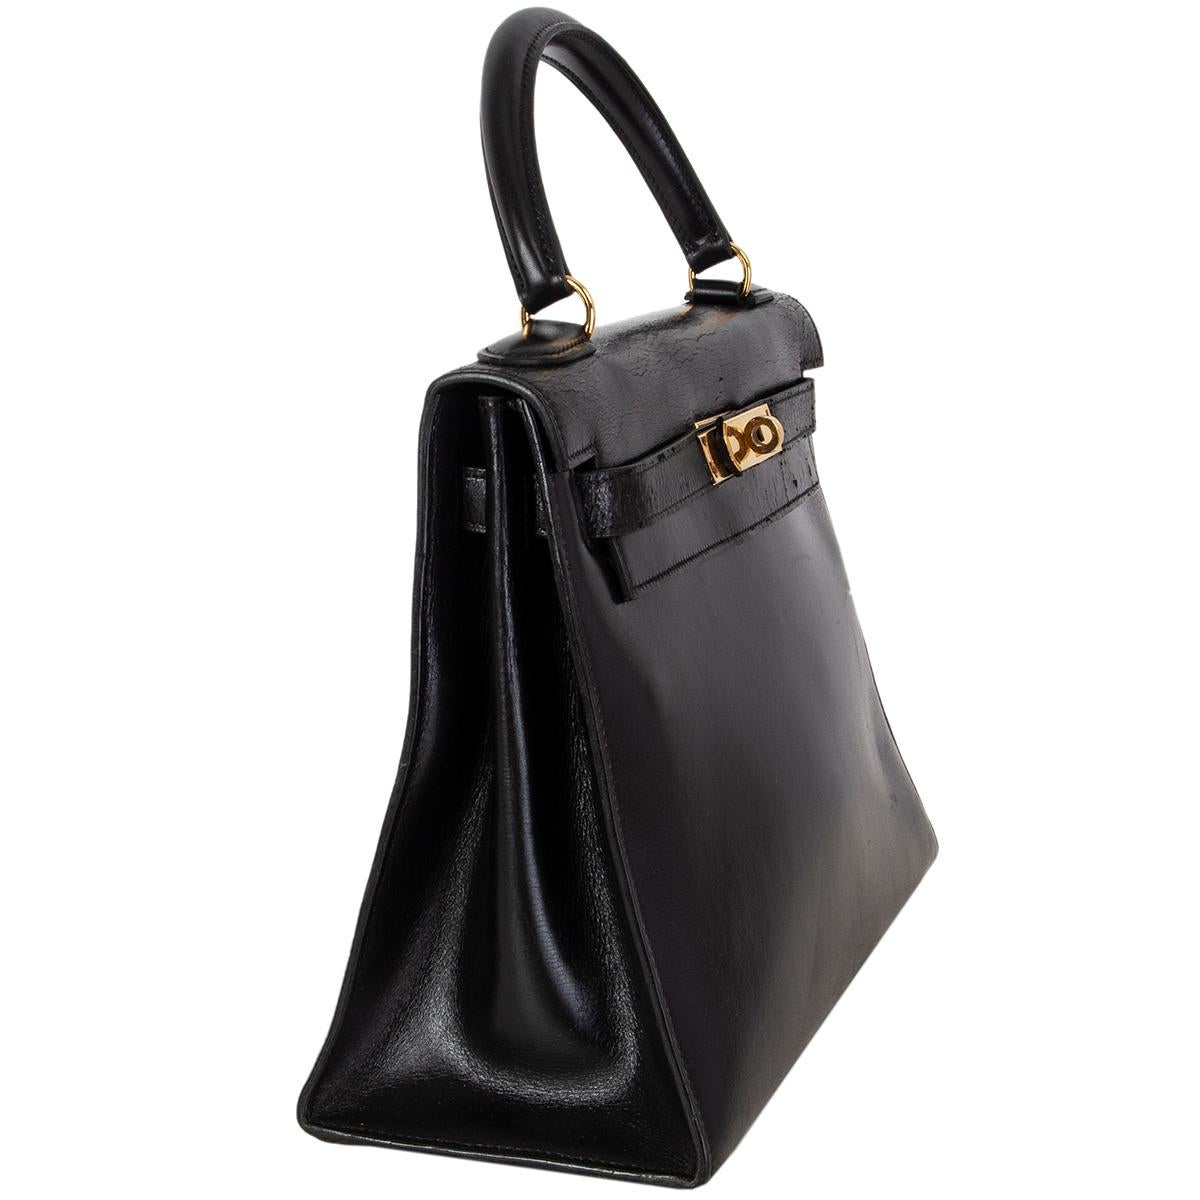 Hermes 'Kelly l 28 Sellier' bag in black Veau Box leather. Vintage 1970. Lined in leather with two open pockets against the front and an open pocket against the back. Has been carried and shoulders show dryness, minimal wear to the corners, the